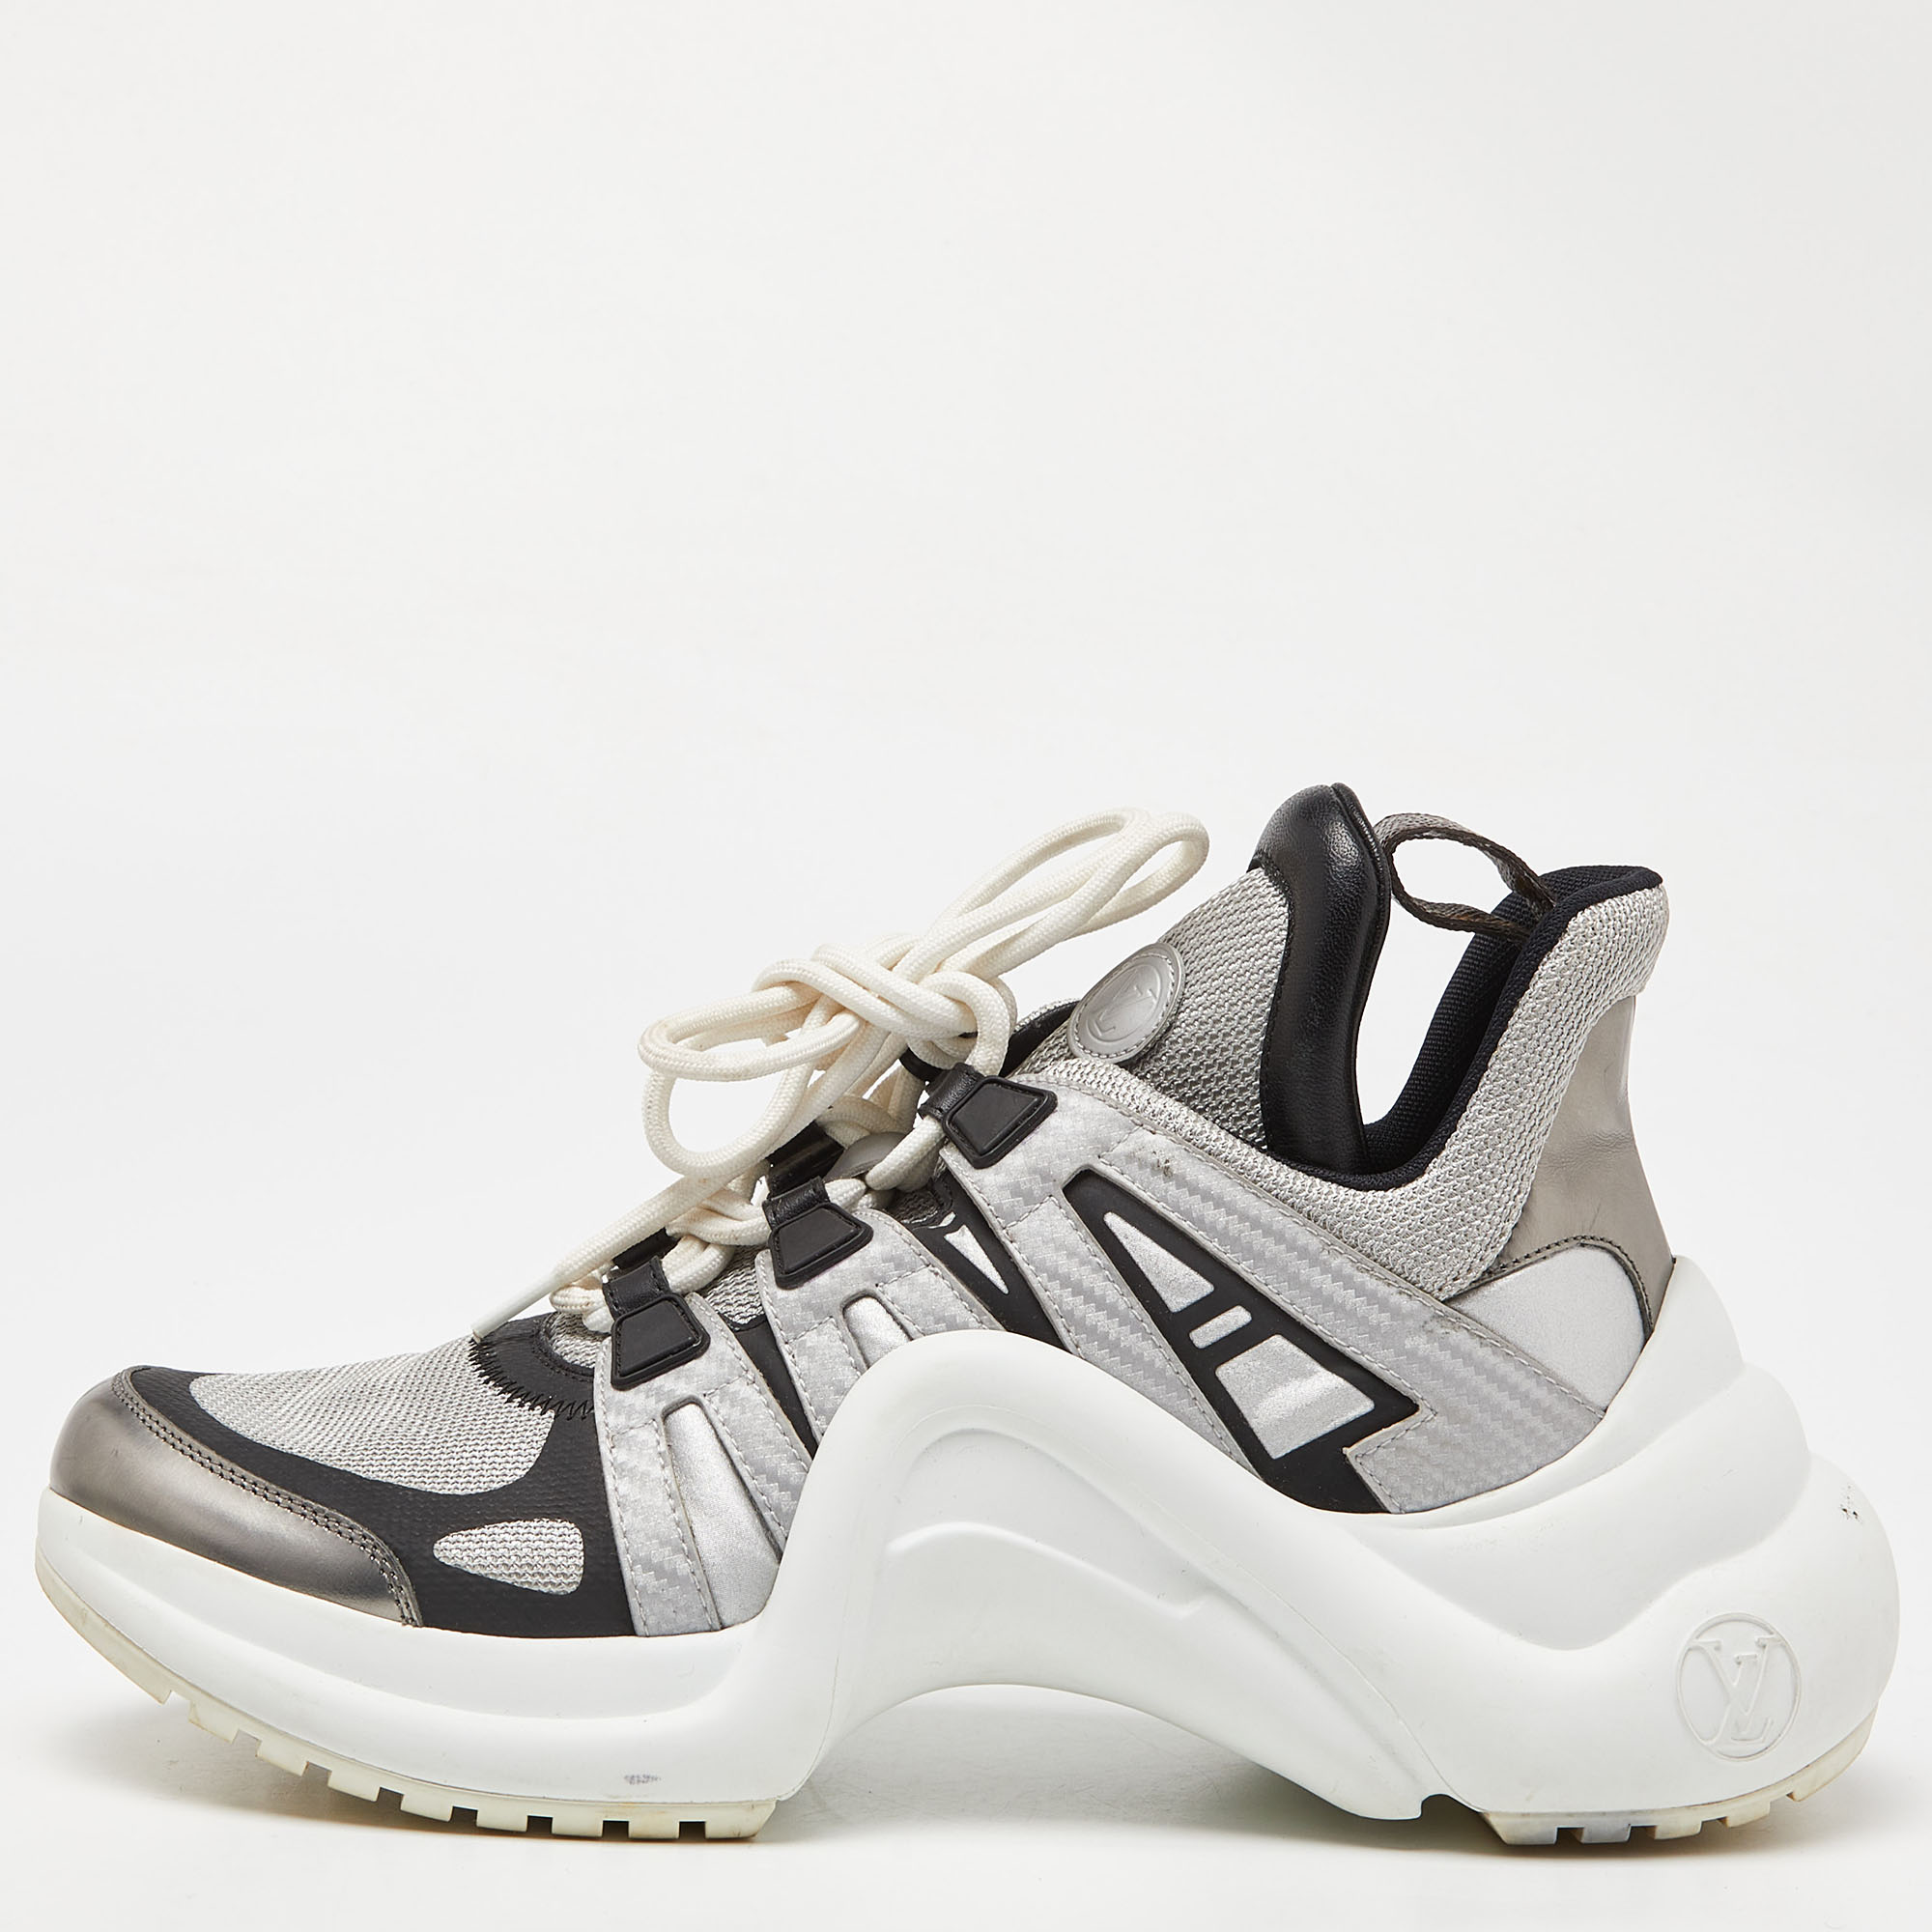 The Spring/Summer 2018 collection by Louis Vuitton introduced us to the Archlight sneakers at a time when the fever for chunky sneakers had just set in. The design is characterized by a futuristic vibe with a tinge of influence from vintage basketball sneakers. These ones are made from mesh along with leather and they carry exaggerated tongues and springy wave shaped soles. They are finished with lace ups on the vamps.